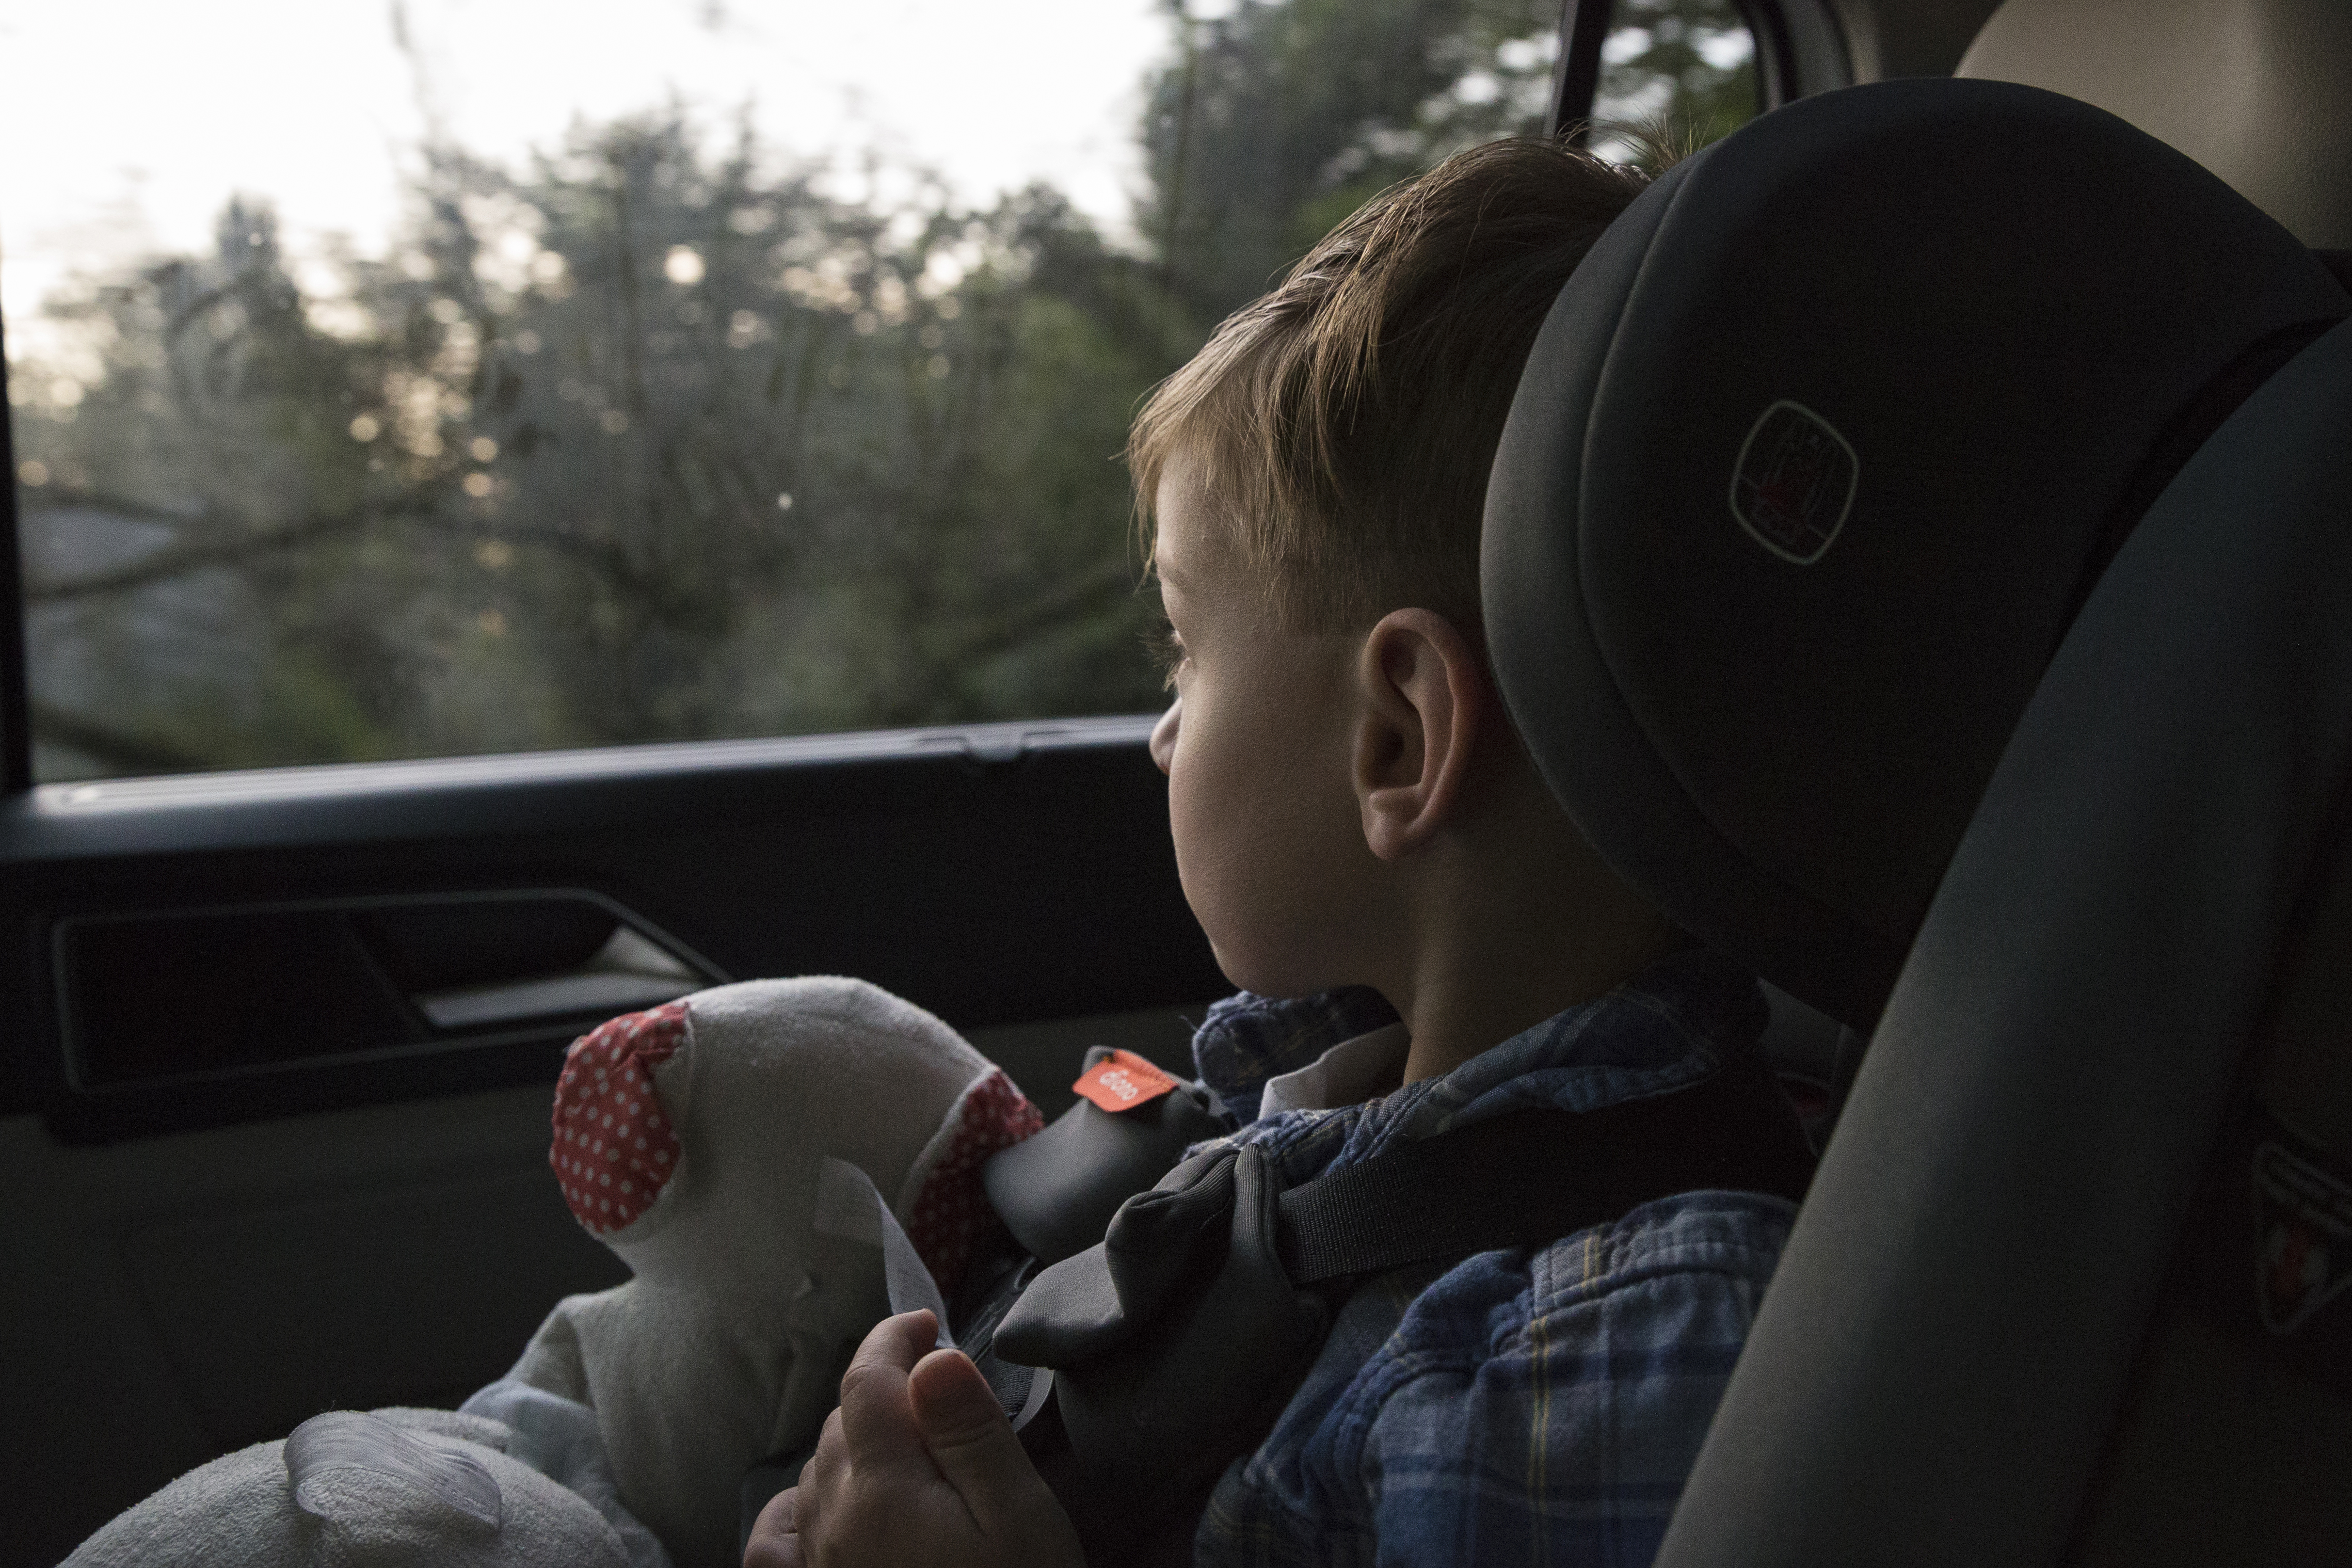 Photo: Owen is sitting in a car seat, looking out the car window. There are trees in his view. On his lap he holds a stuffed animal.